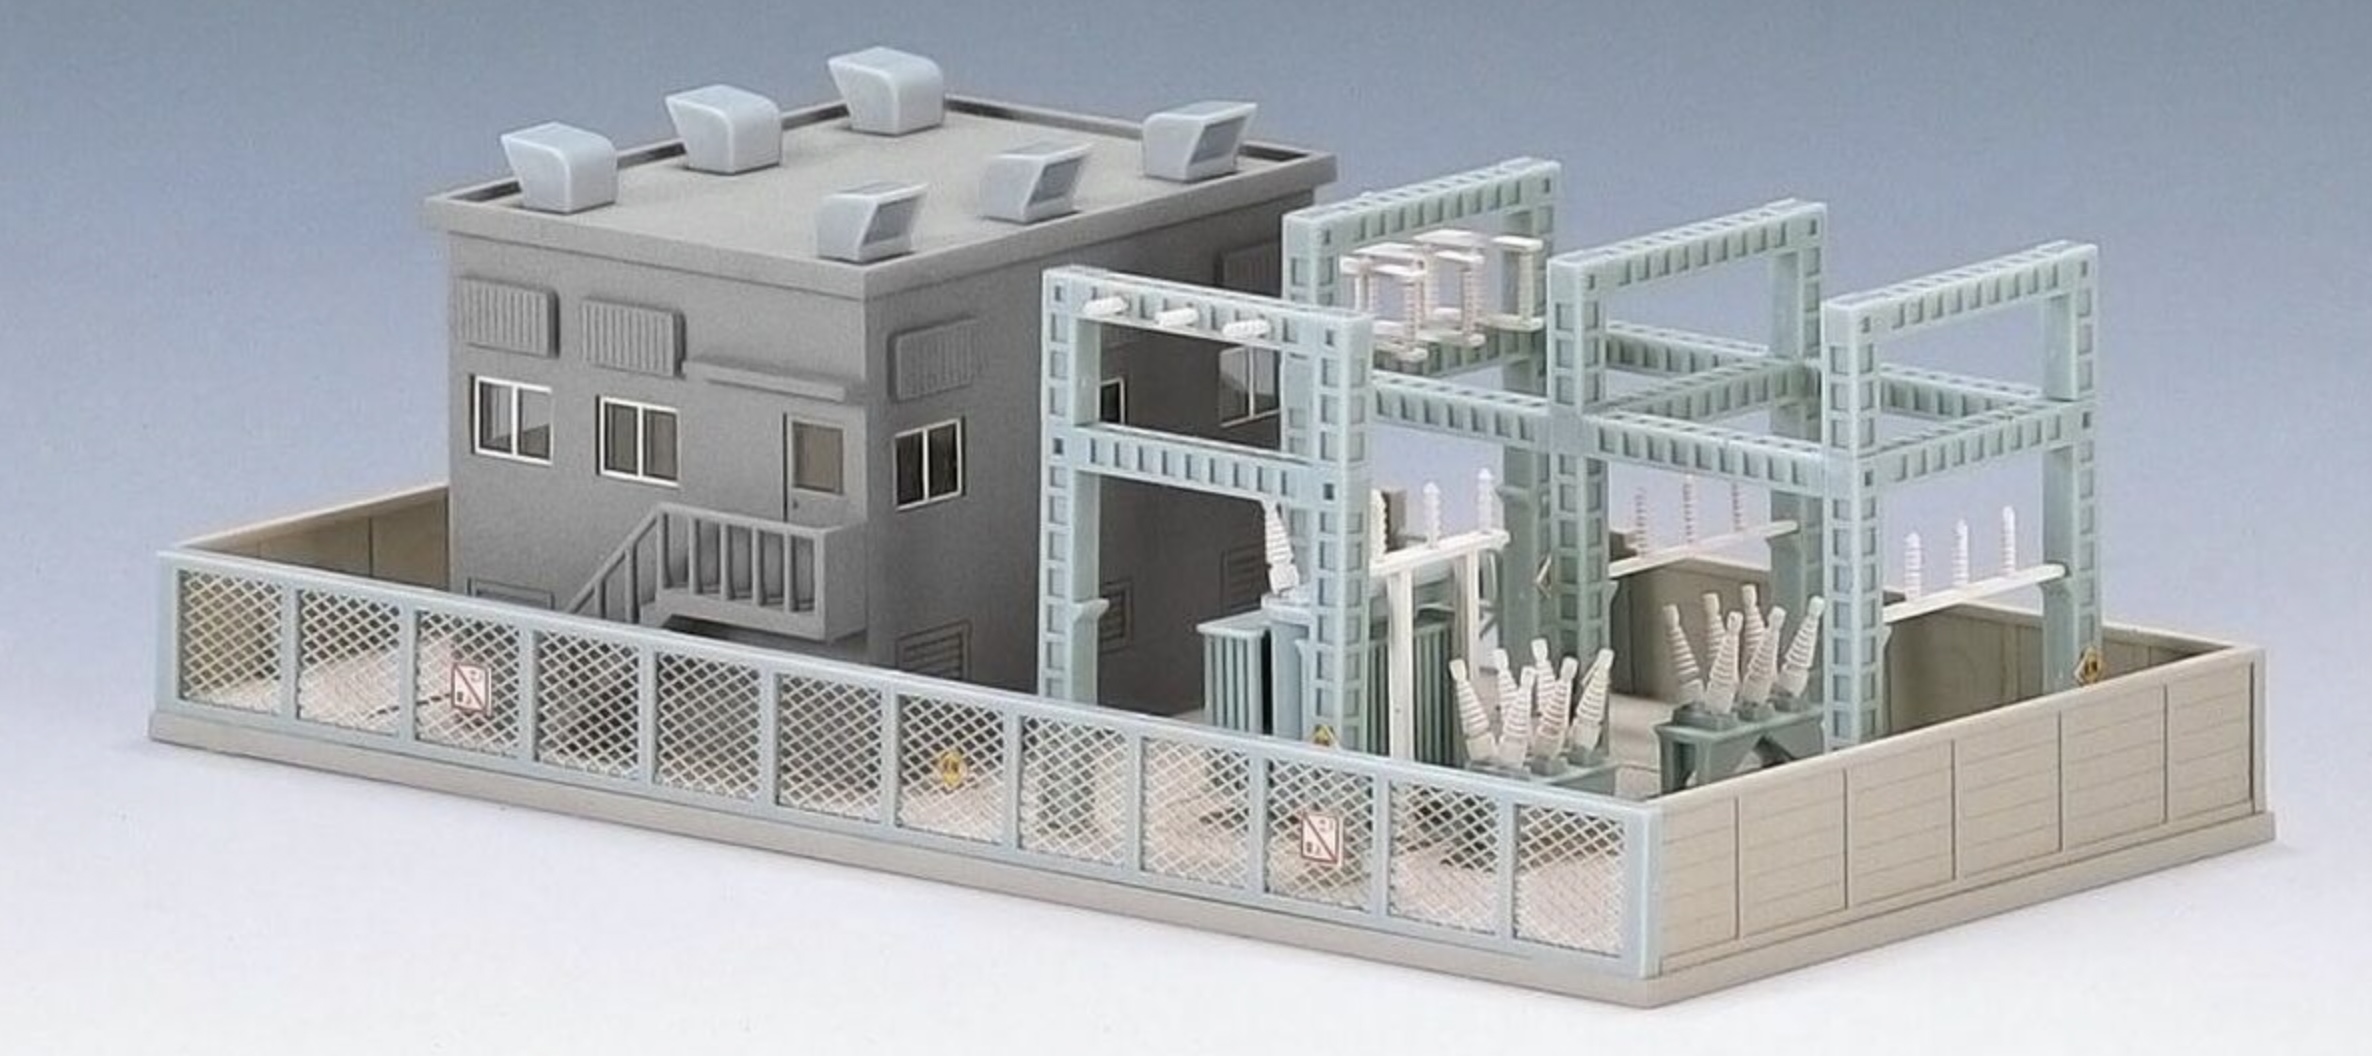 N Scale - Tomix - 4223 - Structure, Municipal, Substation - Municipal Structures - Substation